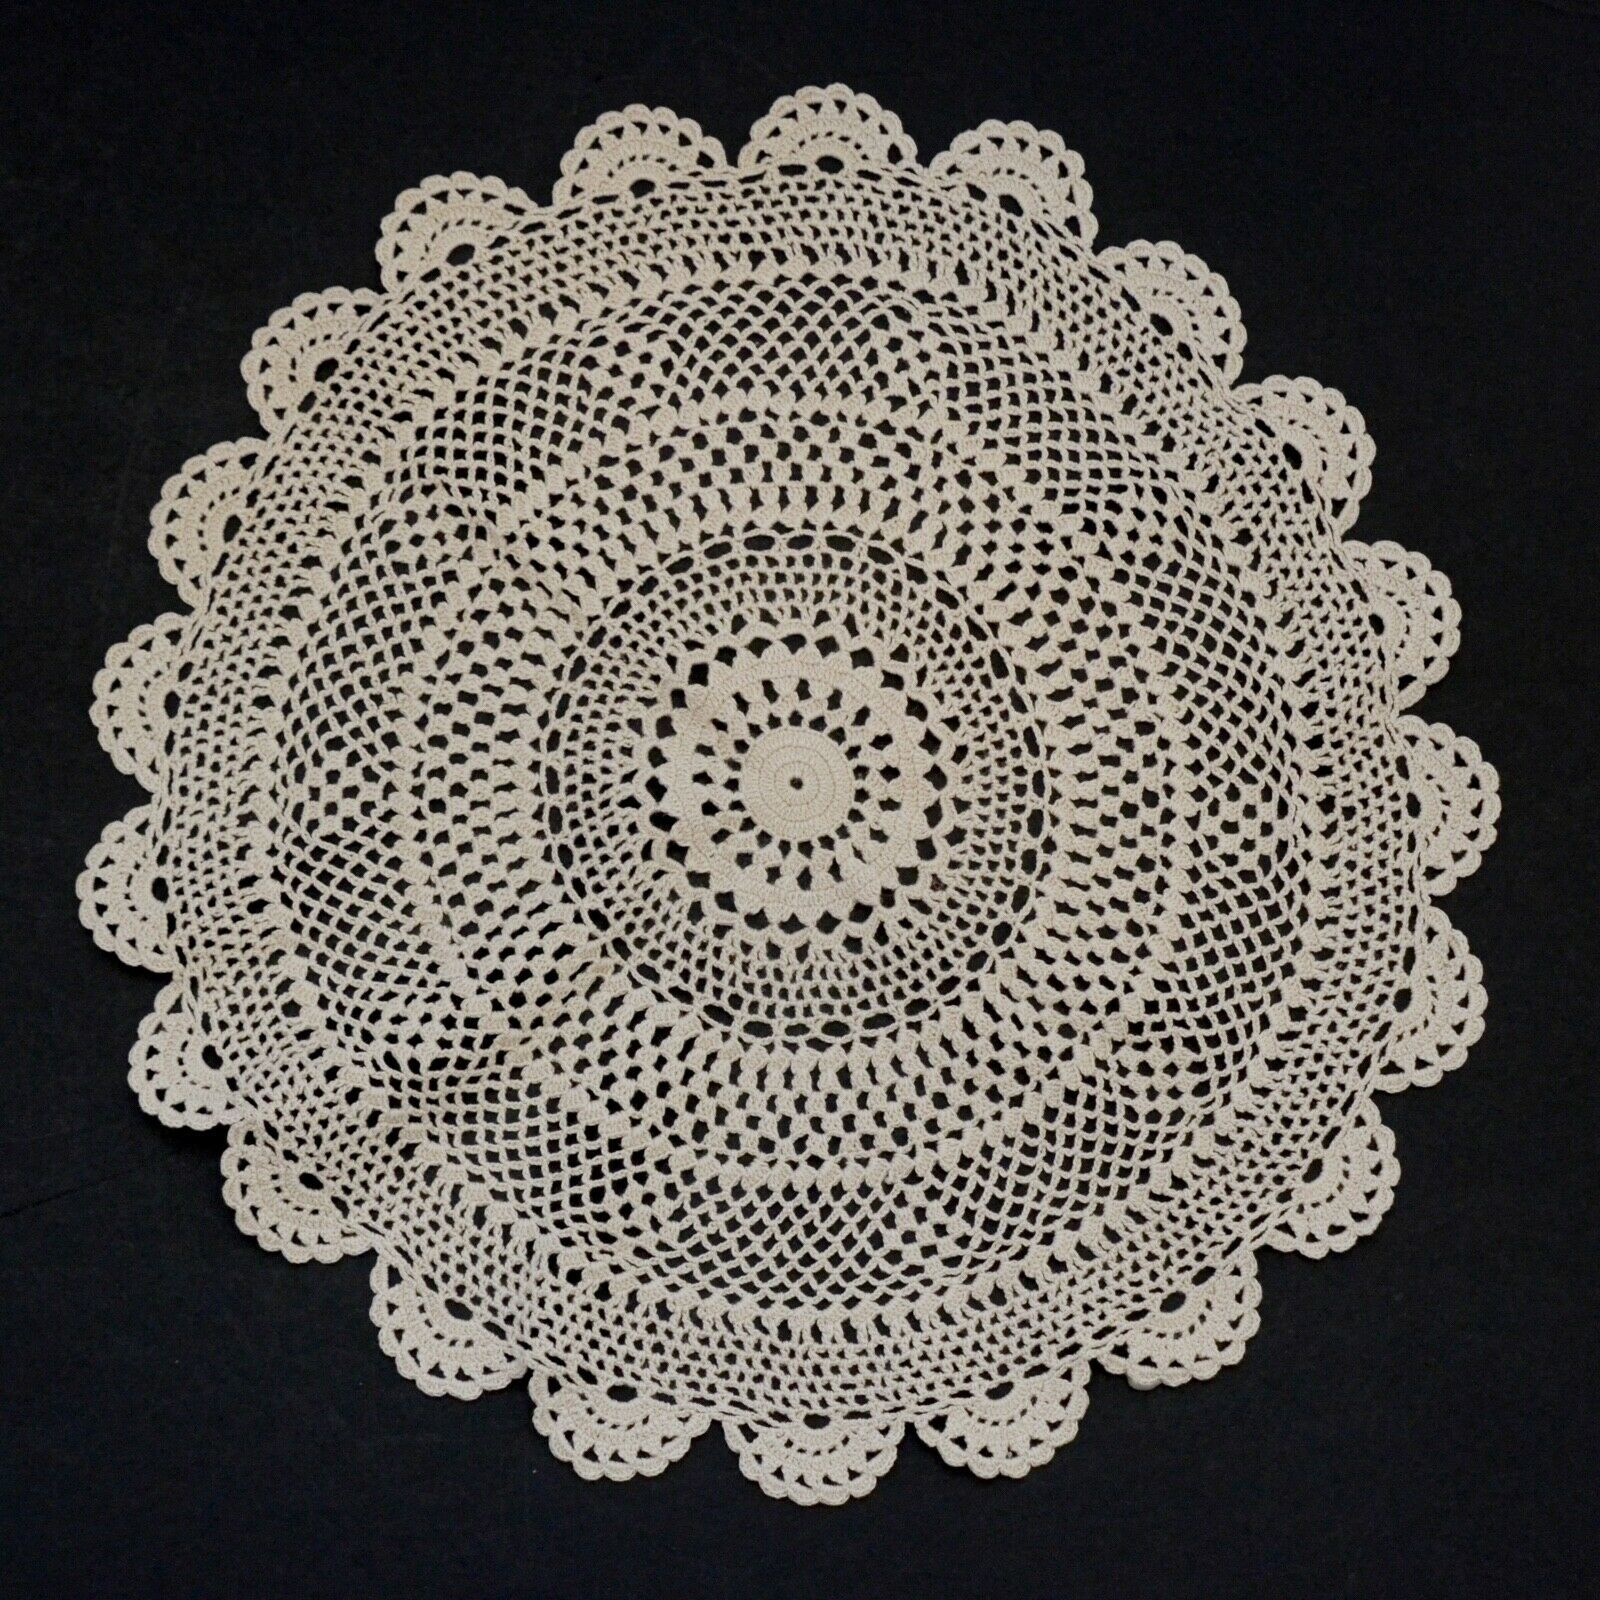 Primary image for Vintage Crochet Cotton Lace Beige Round Doily Mat 14"